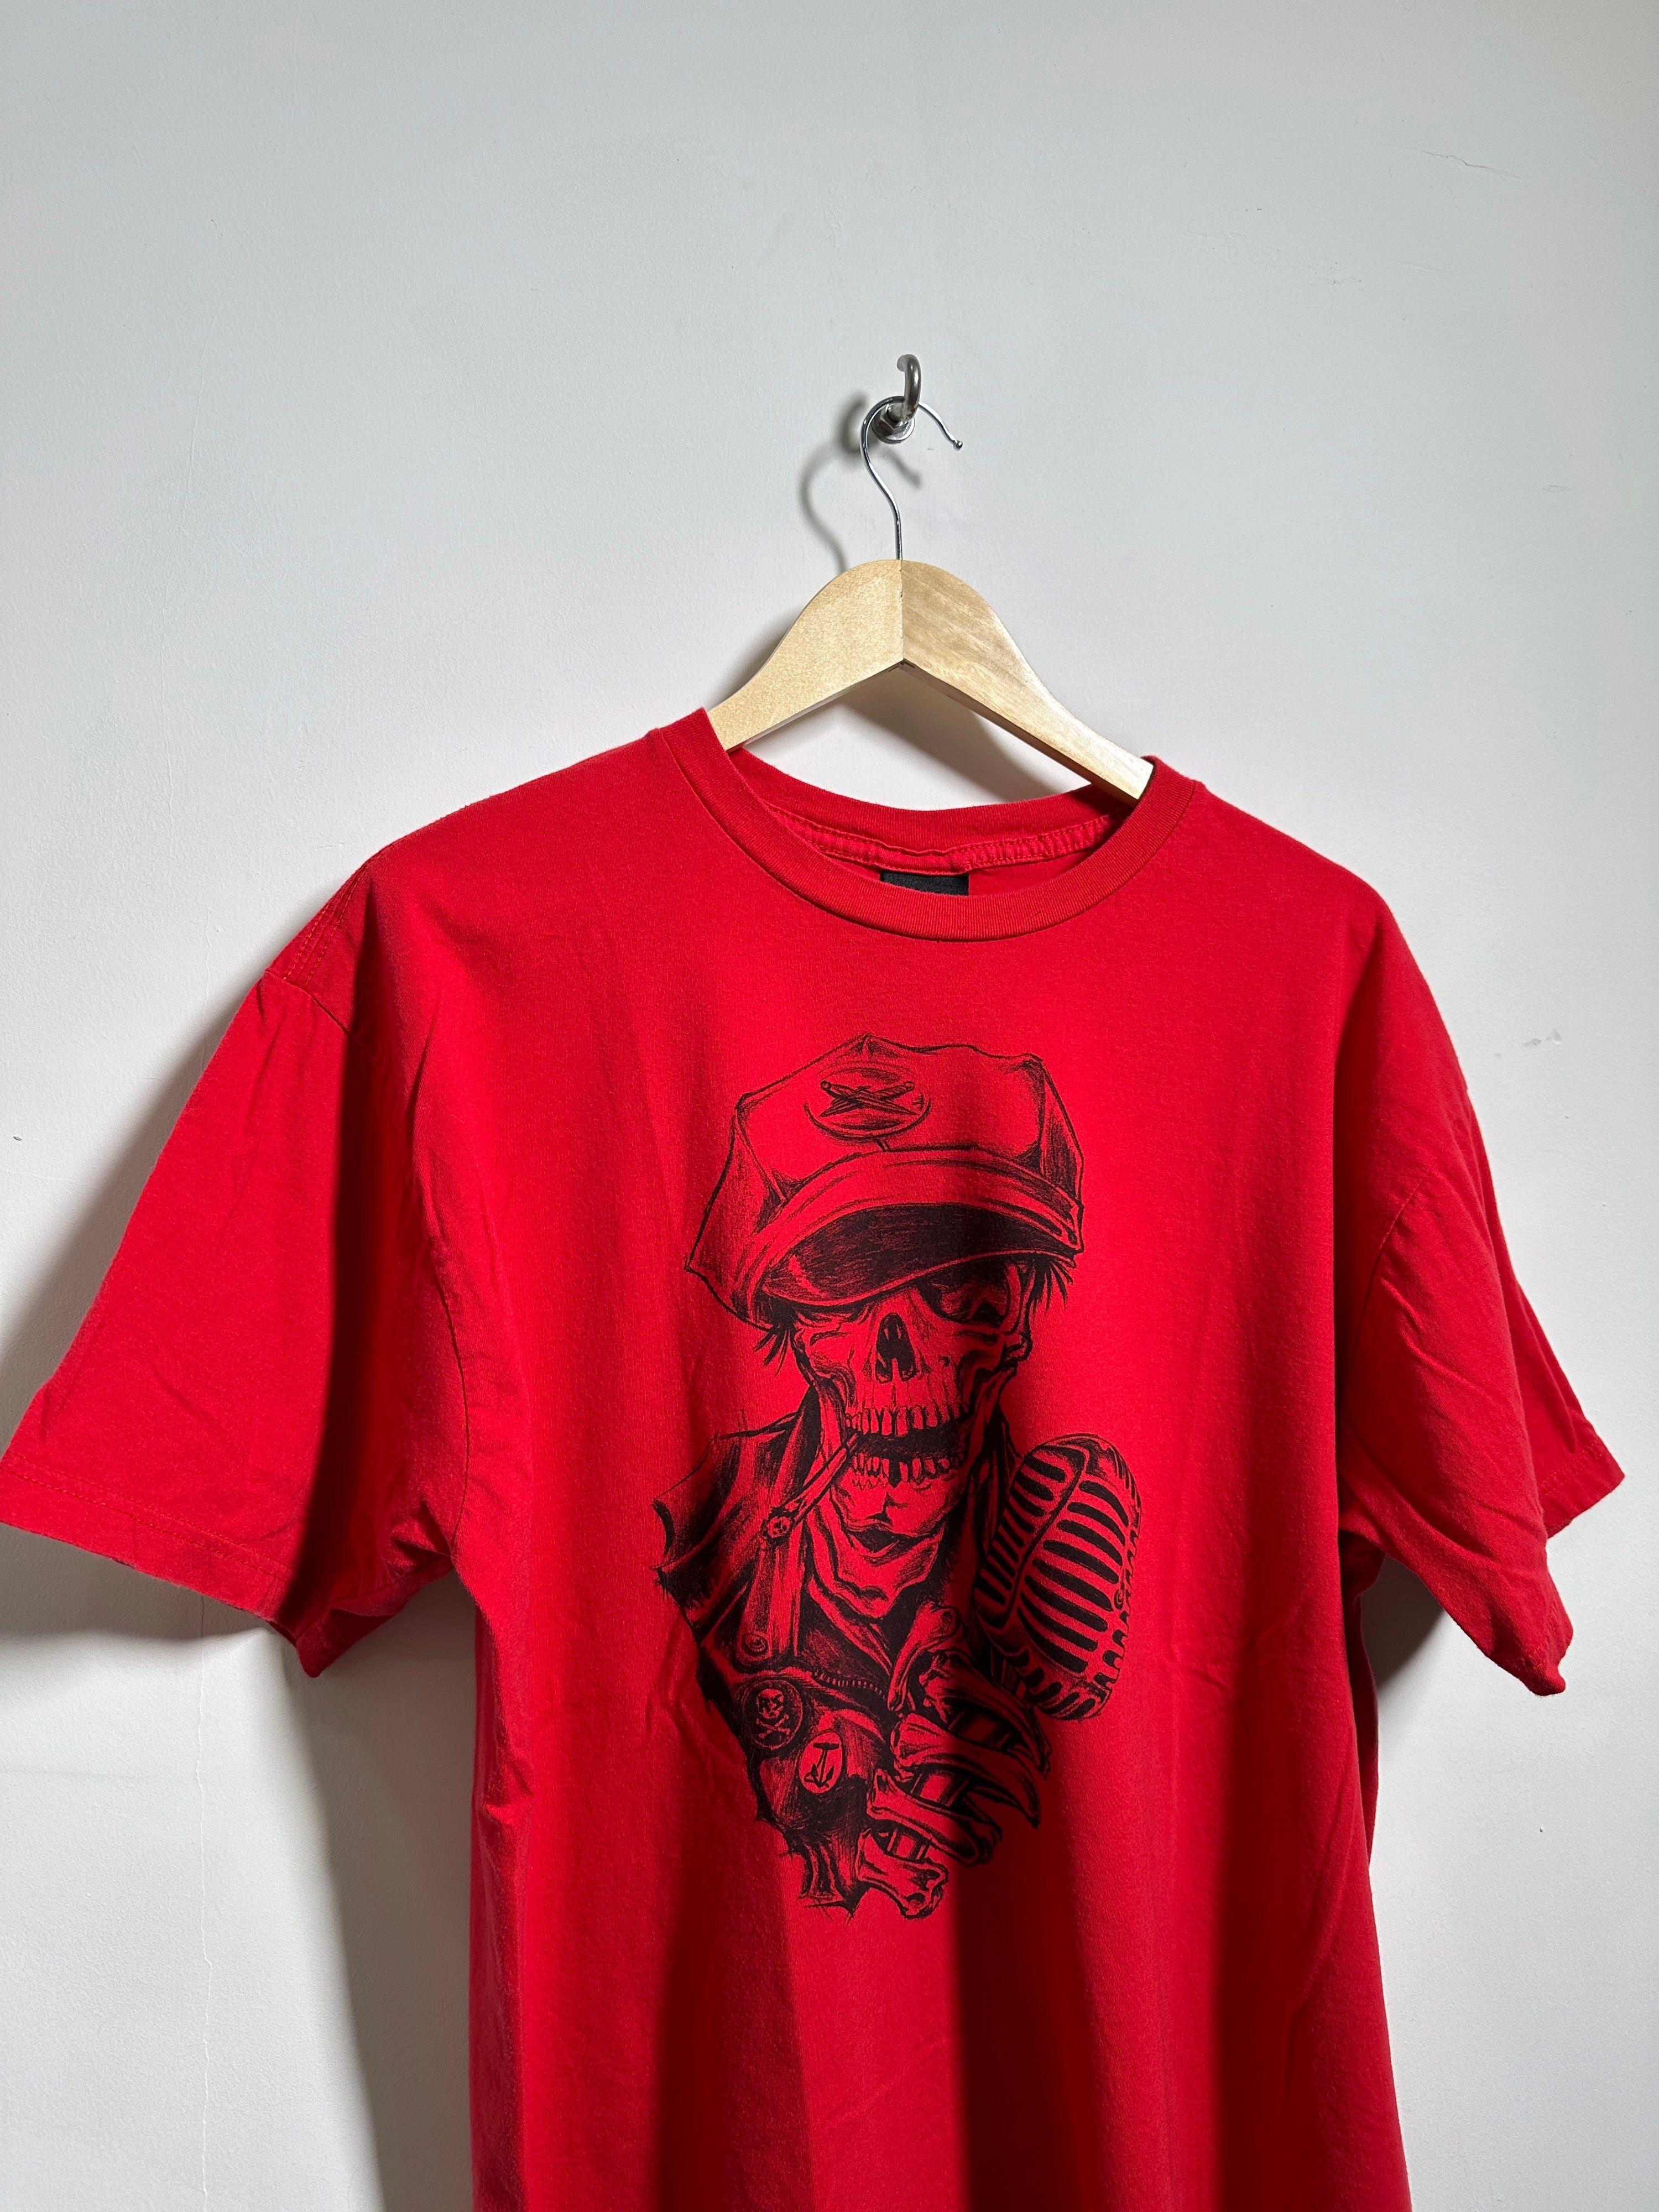 Rock Shady tee in red with skeleton